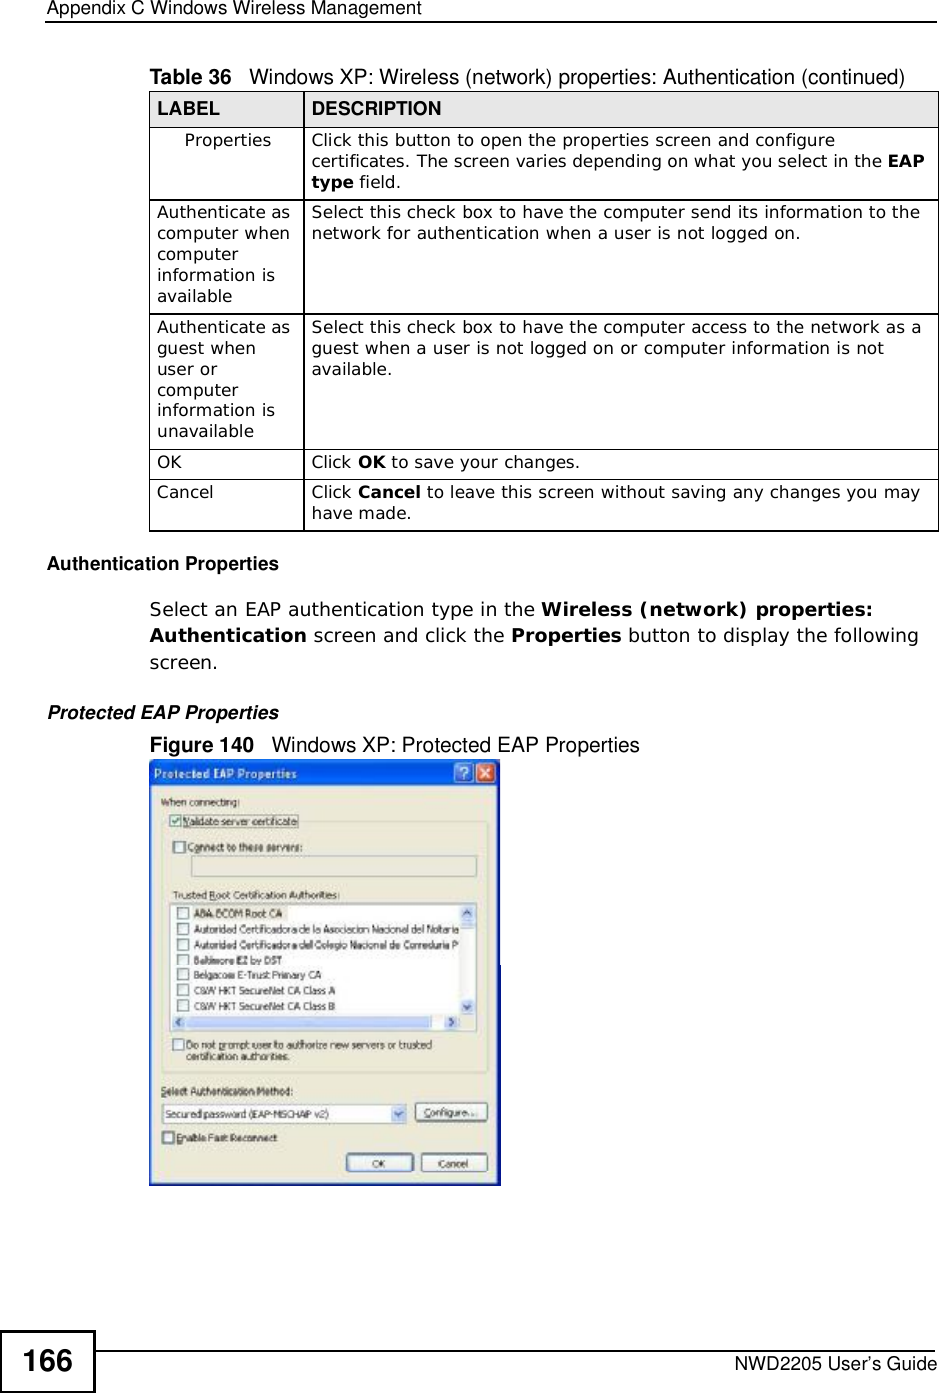 Appendix CWindows Wireless ManagementNWD2205 User’s Guide166Authentication PropertiesSelect an EAP authentication type in the Wireless (network) properties: Authentication screen and click the Properties button to display the following screen. Protected EAP PropertiesFigure 140   Windows XP: Protected EAP PropertiesPropertiesClick this button to open the properties screen and configure certificates. The screen varies depending on what you select in the EAPtype field.Authenticate as computer when computer information is availableSelect this check box to have the computer send its information to the network for authentication when a user is not logged on.Authenticate as guest when user or computer information is unavailableSelect this check box to have the computer access to the network as a guest when a user is not logged on or computer information is not available.OKClick OK to save your changes.CancelClick Cancel to leave this screen without saving any changes you may have made.Table 36   Windows XP: Wireless (network) properties: Authentication (continued)LABEL DESCRIPTION